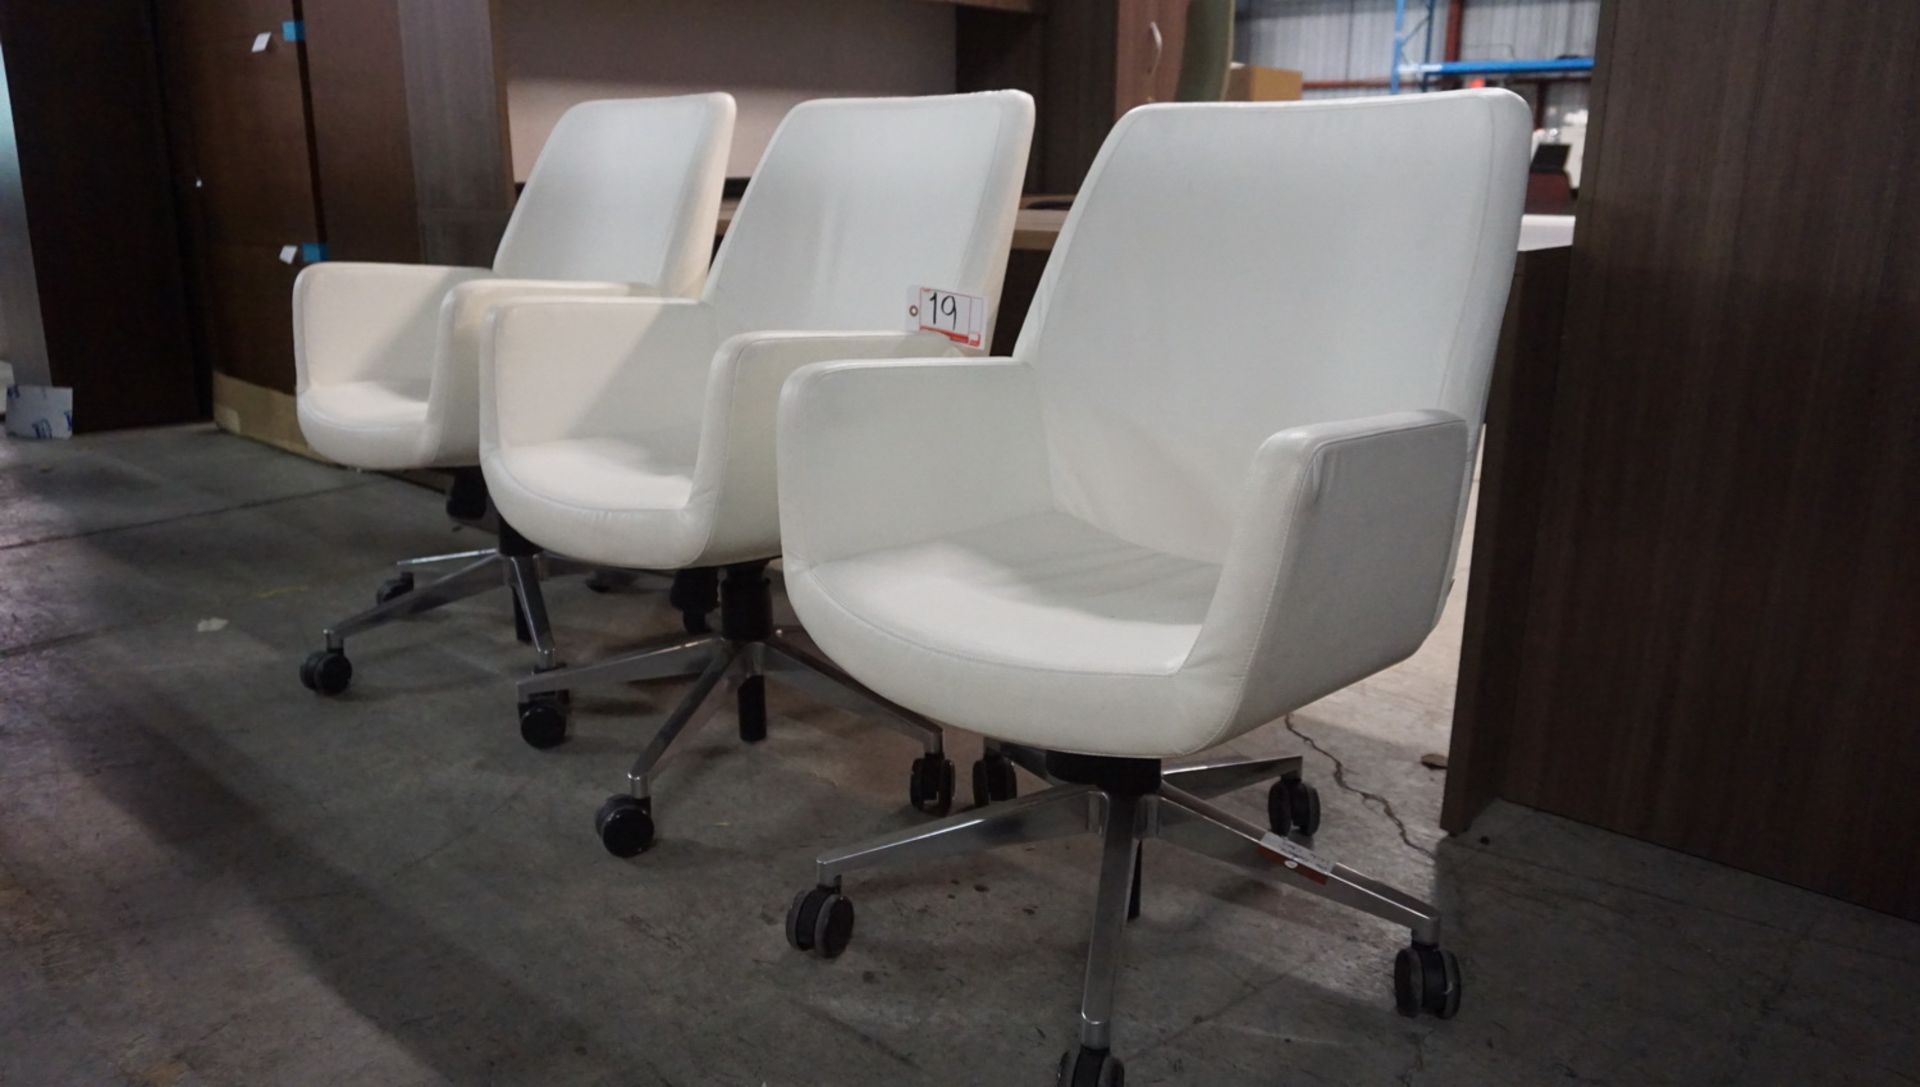 UNITS - STEELCASE COALESSE (IVORY) PNEU AJD OFFICE CHAIRS